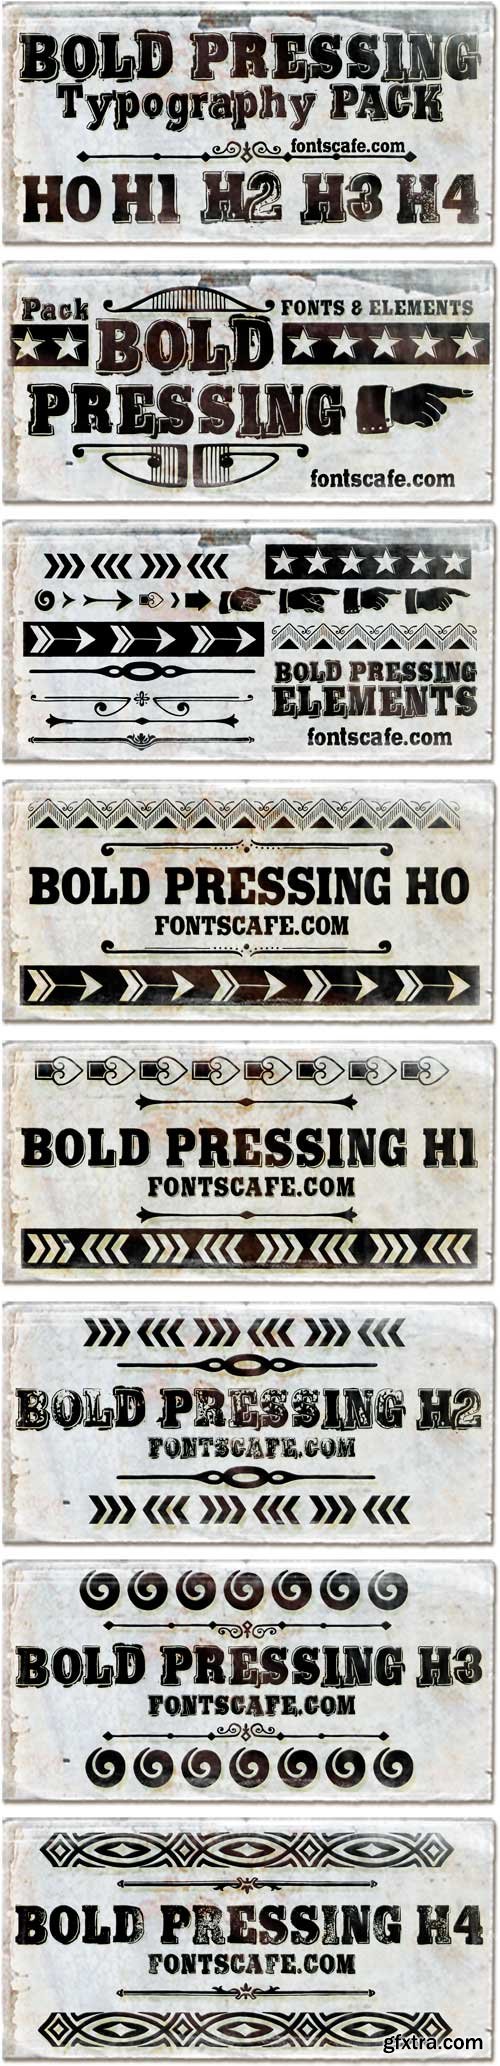 Bold Pressing Pack Font Family - 7 Fonts for $233